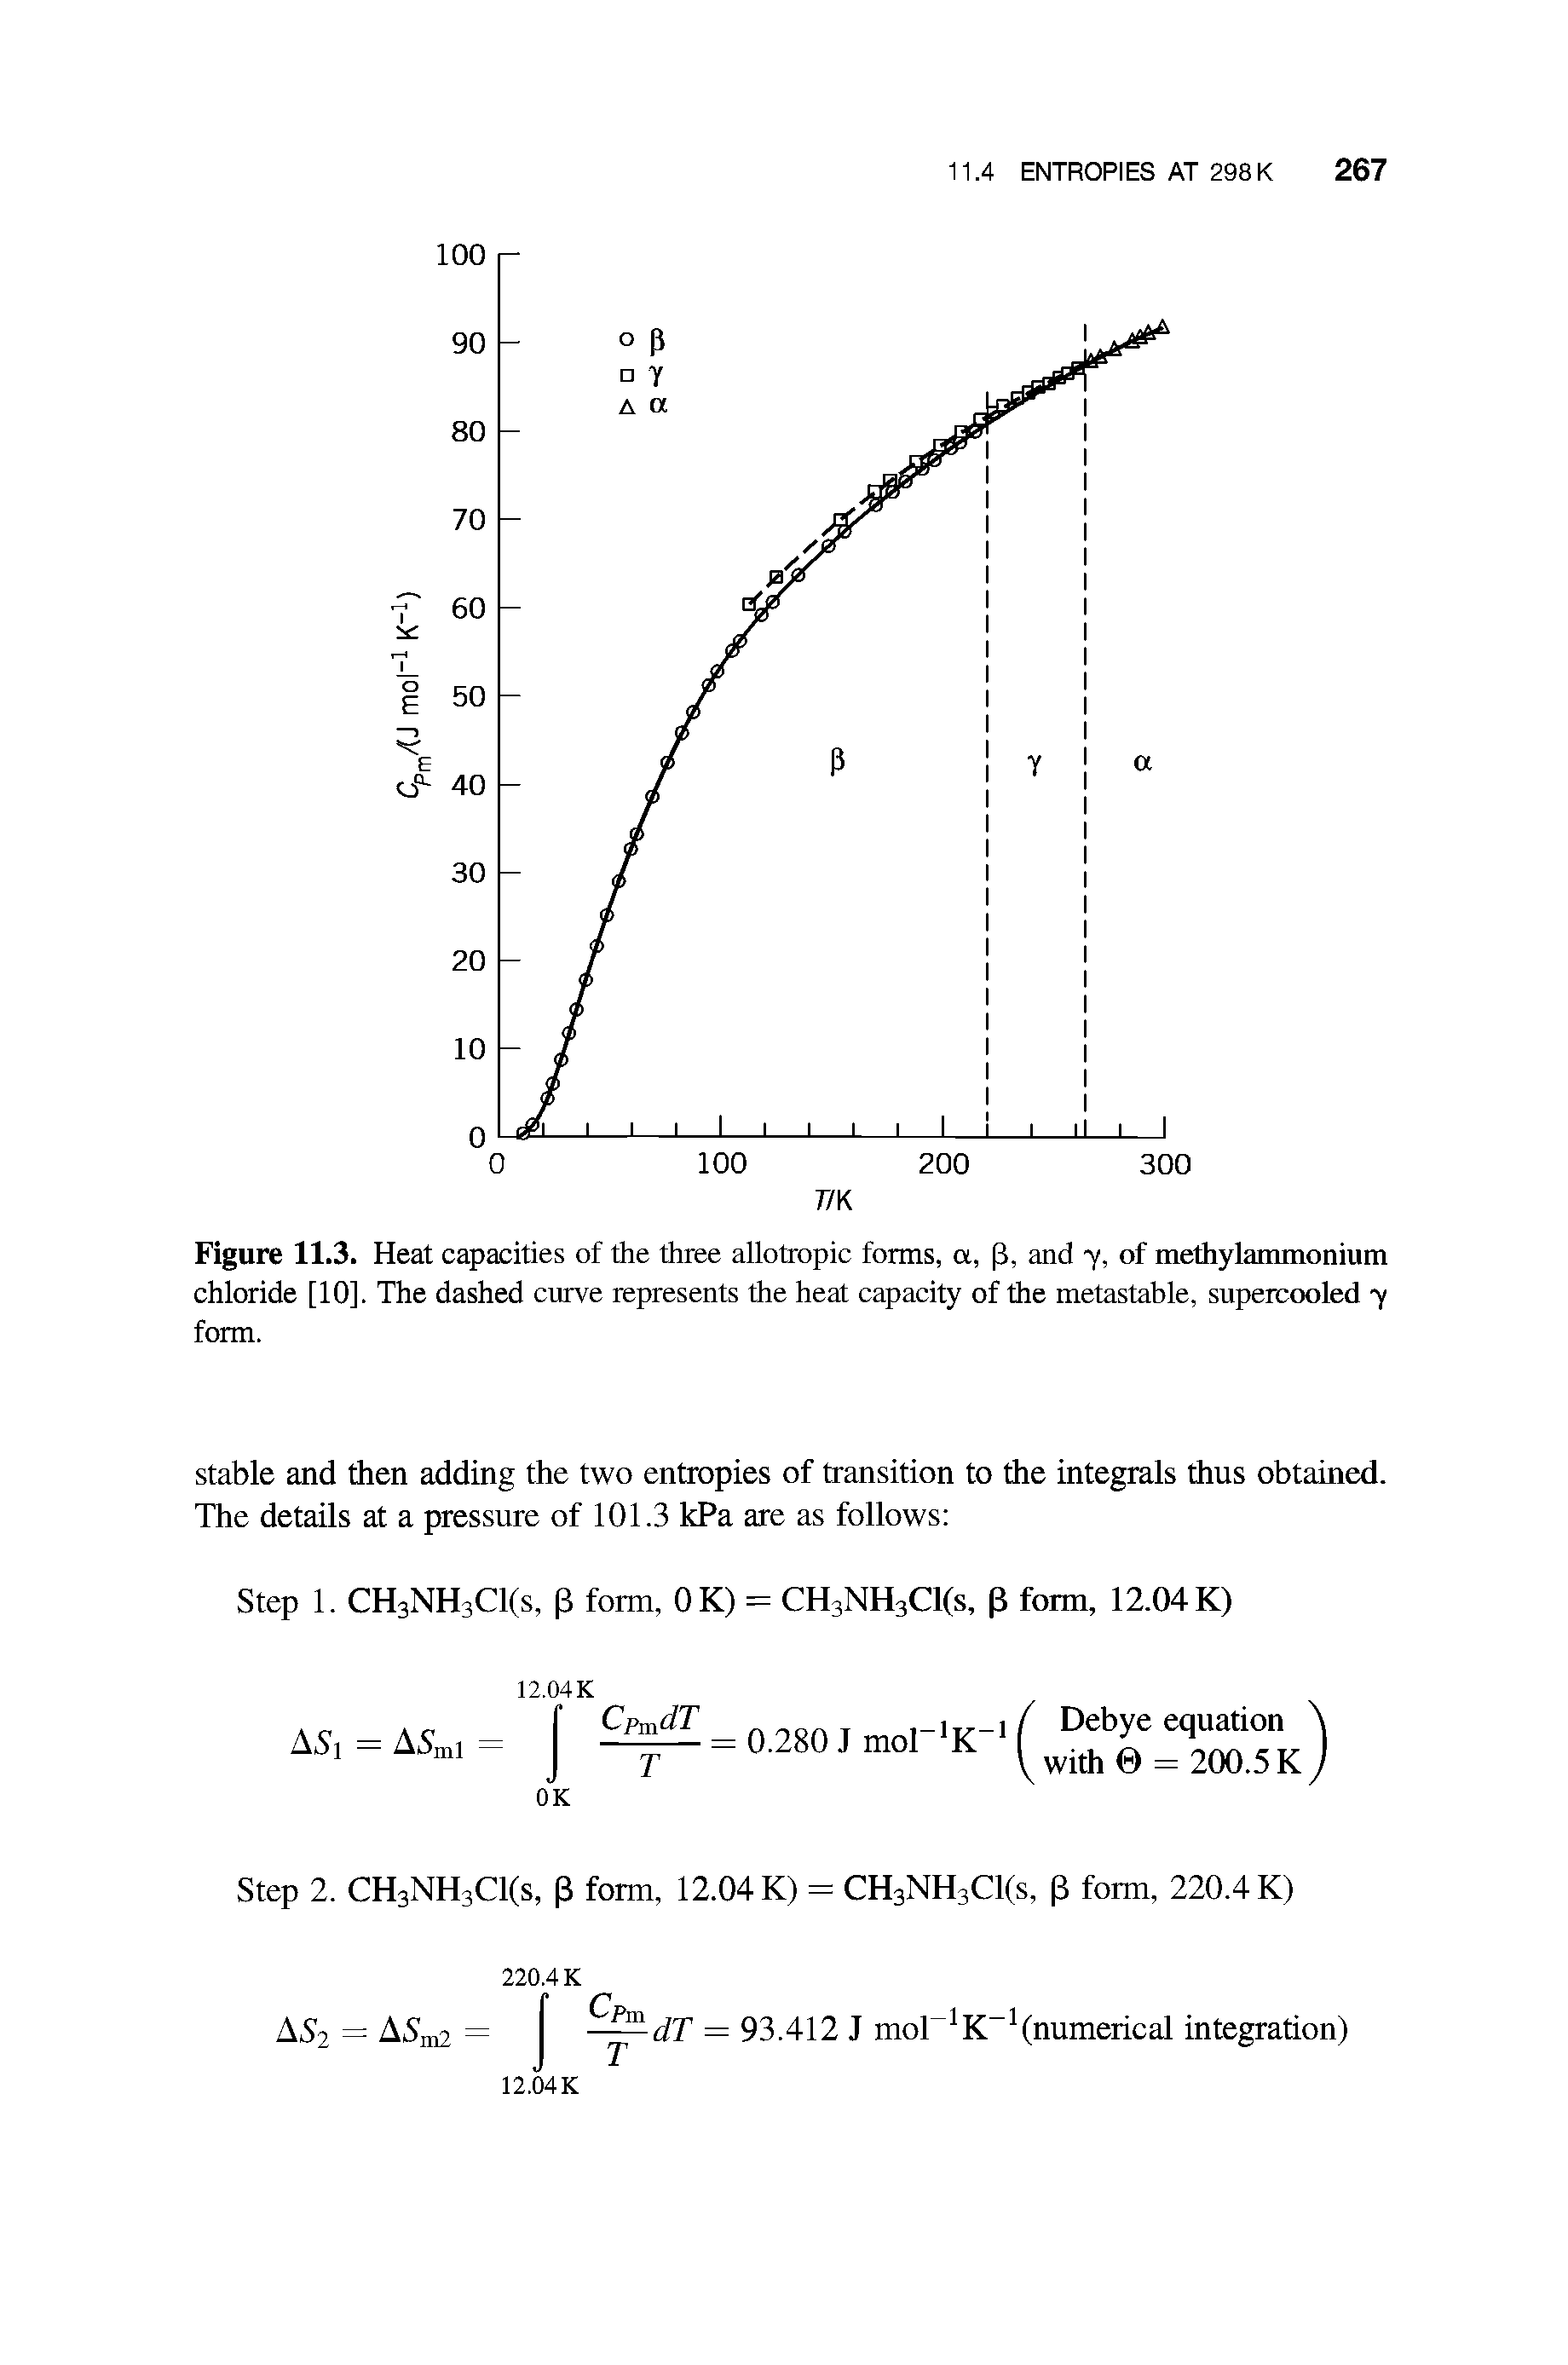 Figure 11.3. Heat capacities of the three allotropic forms, a, (3, and y, of methylammonium chloride [10]. The dashed curve represents the heat capacity of the metastable, supercooled y form.